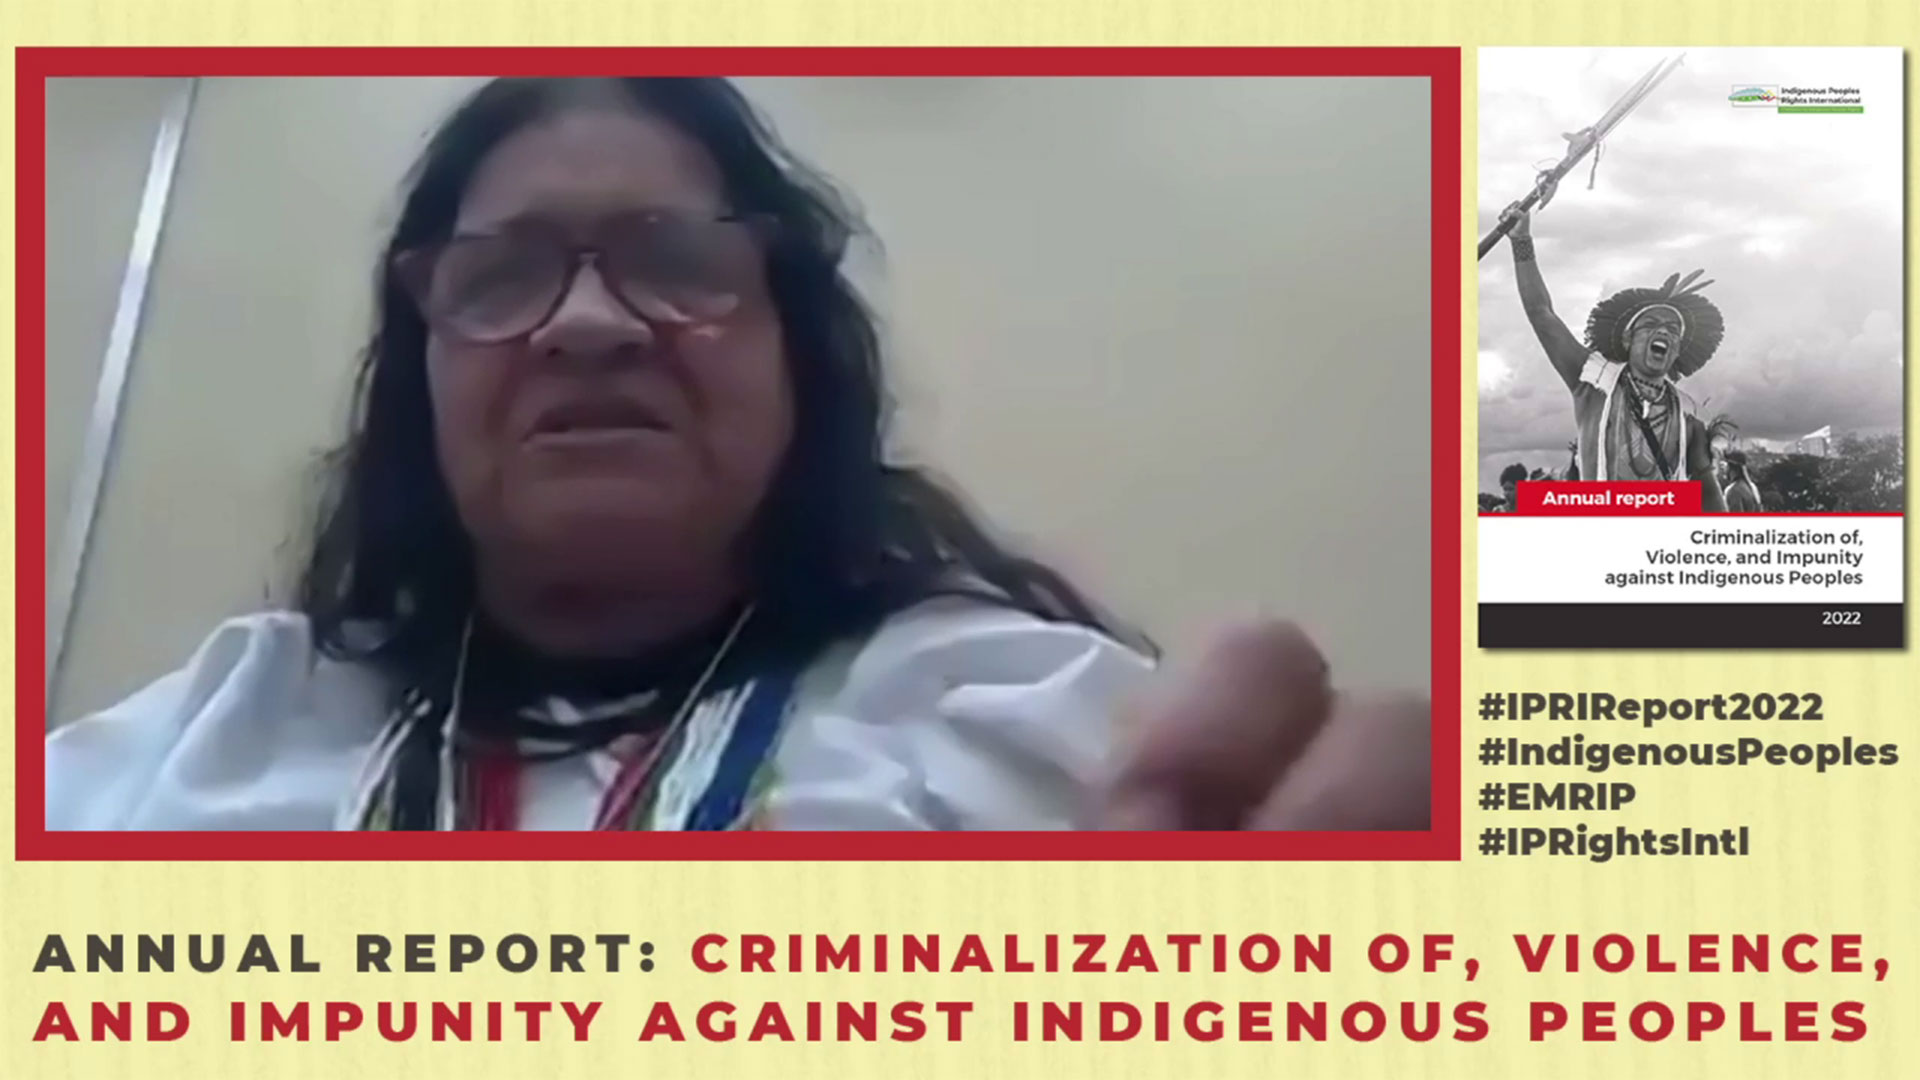 The continuing impunity in attacks against Indigenous Peoples